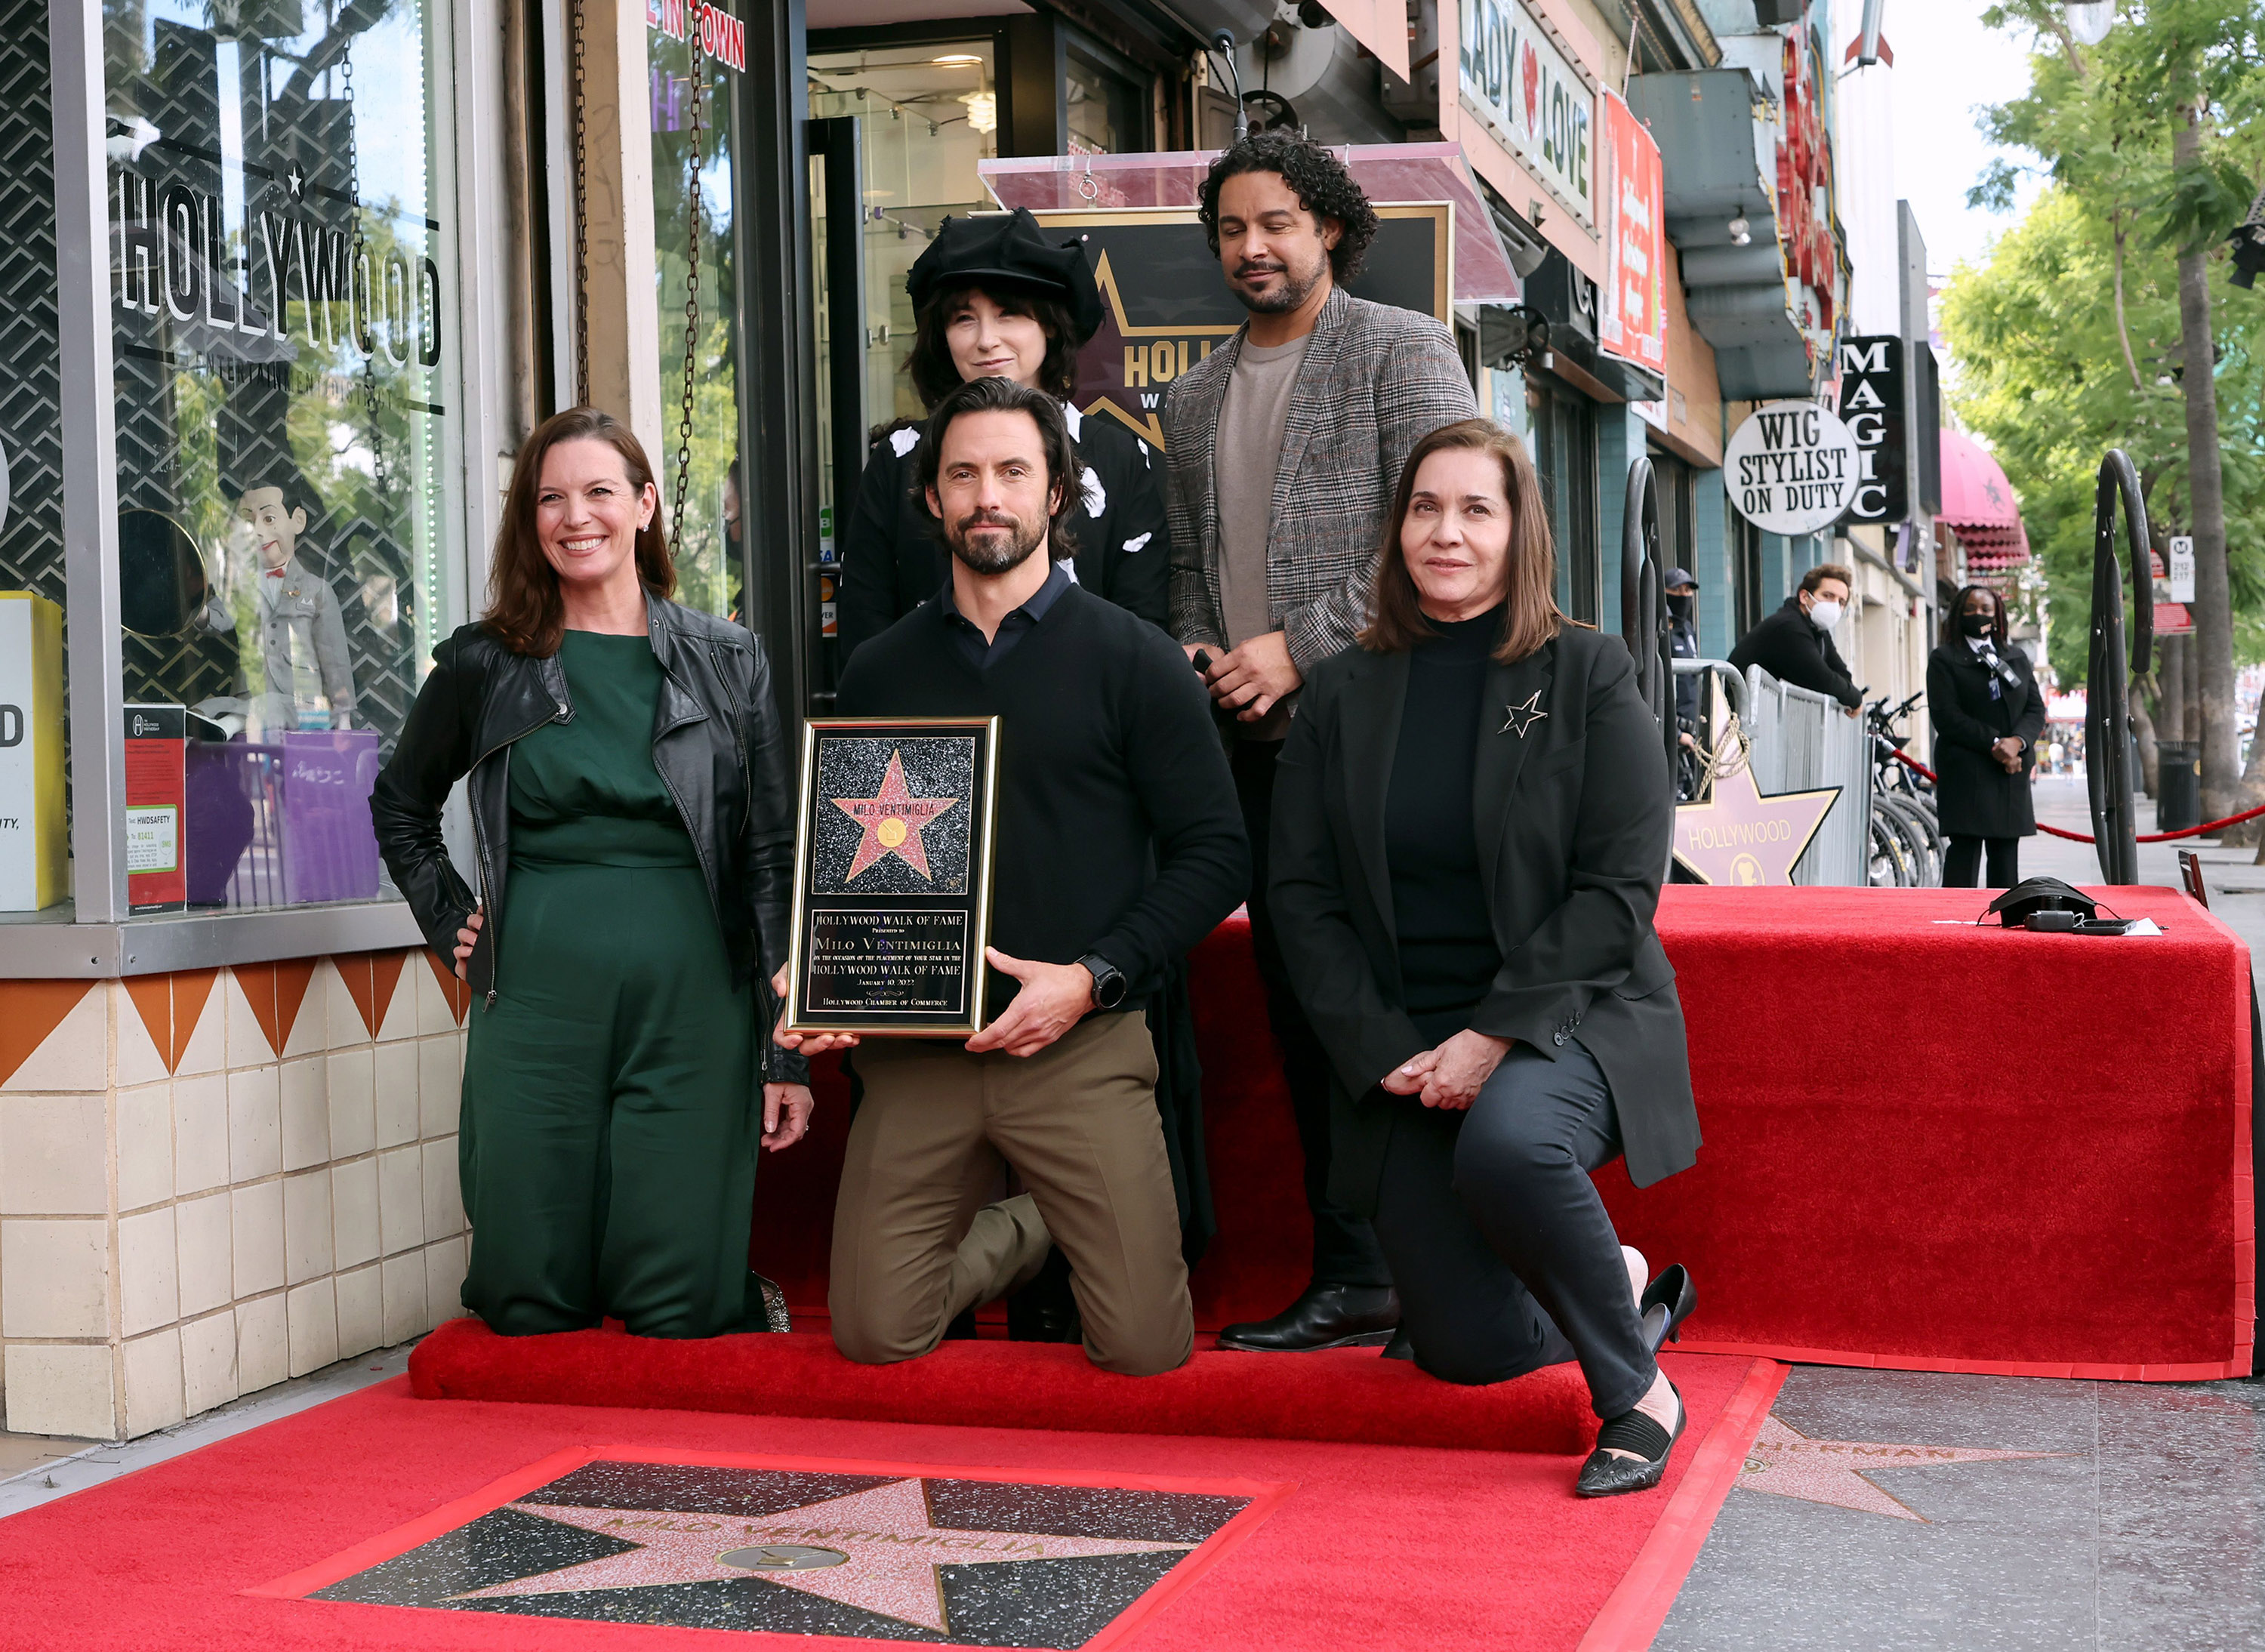 Nicole Mihalka, Chair of the Hollywood Chamber of Commerce, Amy Sherman-Palladino, Milo Ventimiglia, Jon Huertas, and Hollywood Walk of Fame Producer Ana Martinez attend the Hollywood Walk of Fame Star Ceremony for Milo Ventimiglia on Jan. 10, 2022, in Hollywood, Calif.